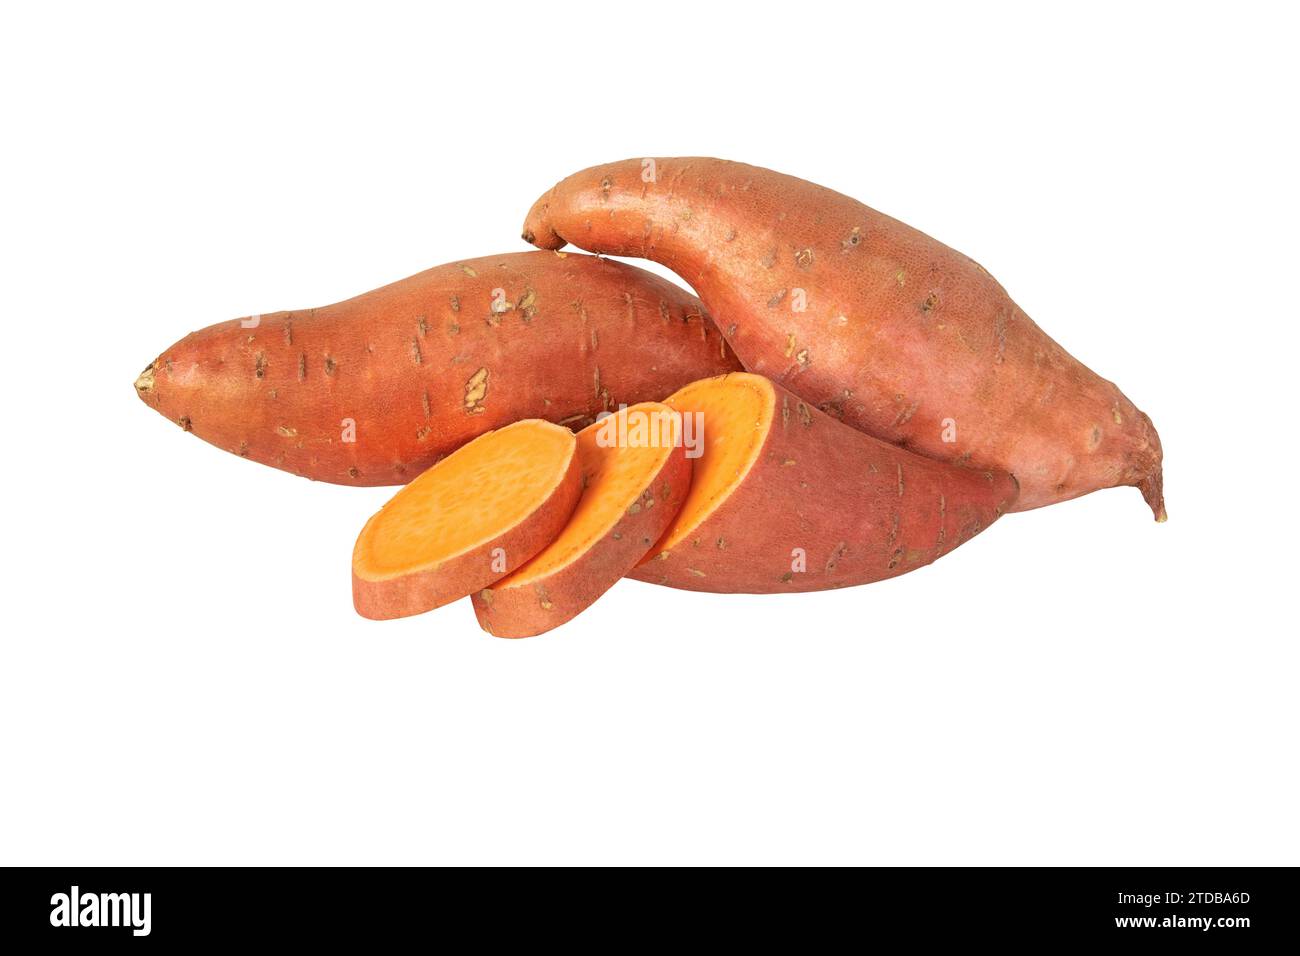 Sweet potato or boniato two whole and one sliced tubes with red skin and yellow flesh isolated on white. Vegetable food staple. Stock Photo